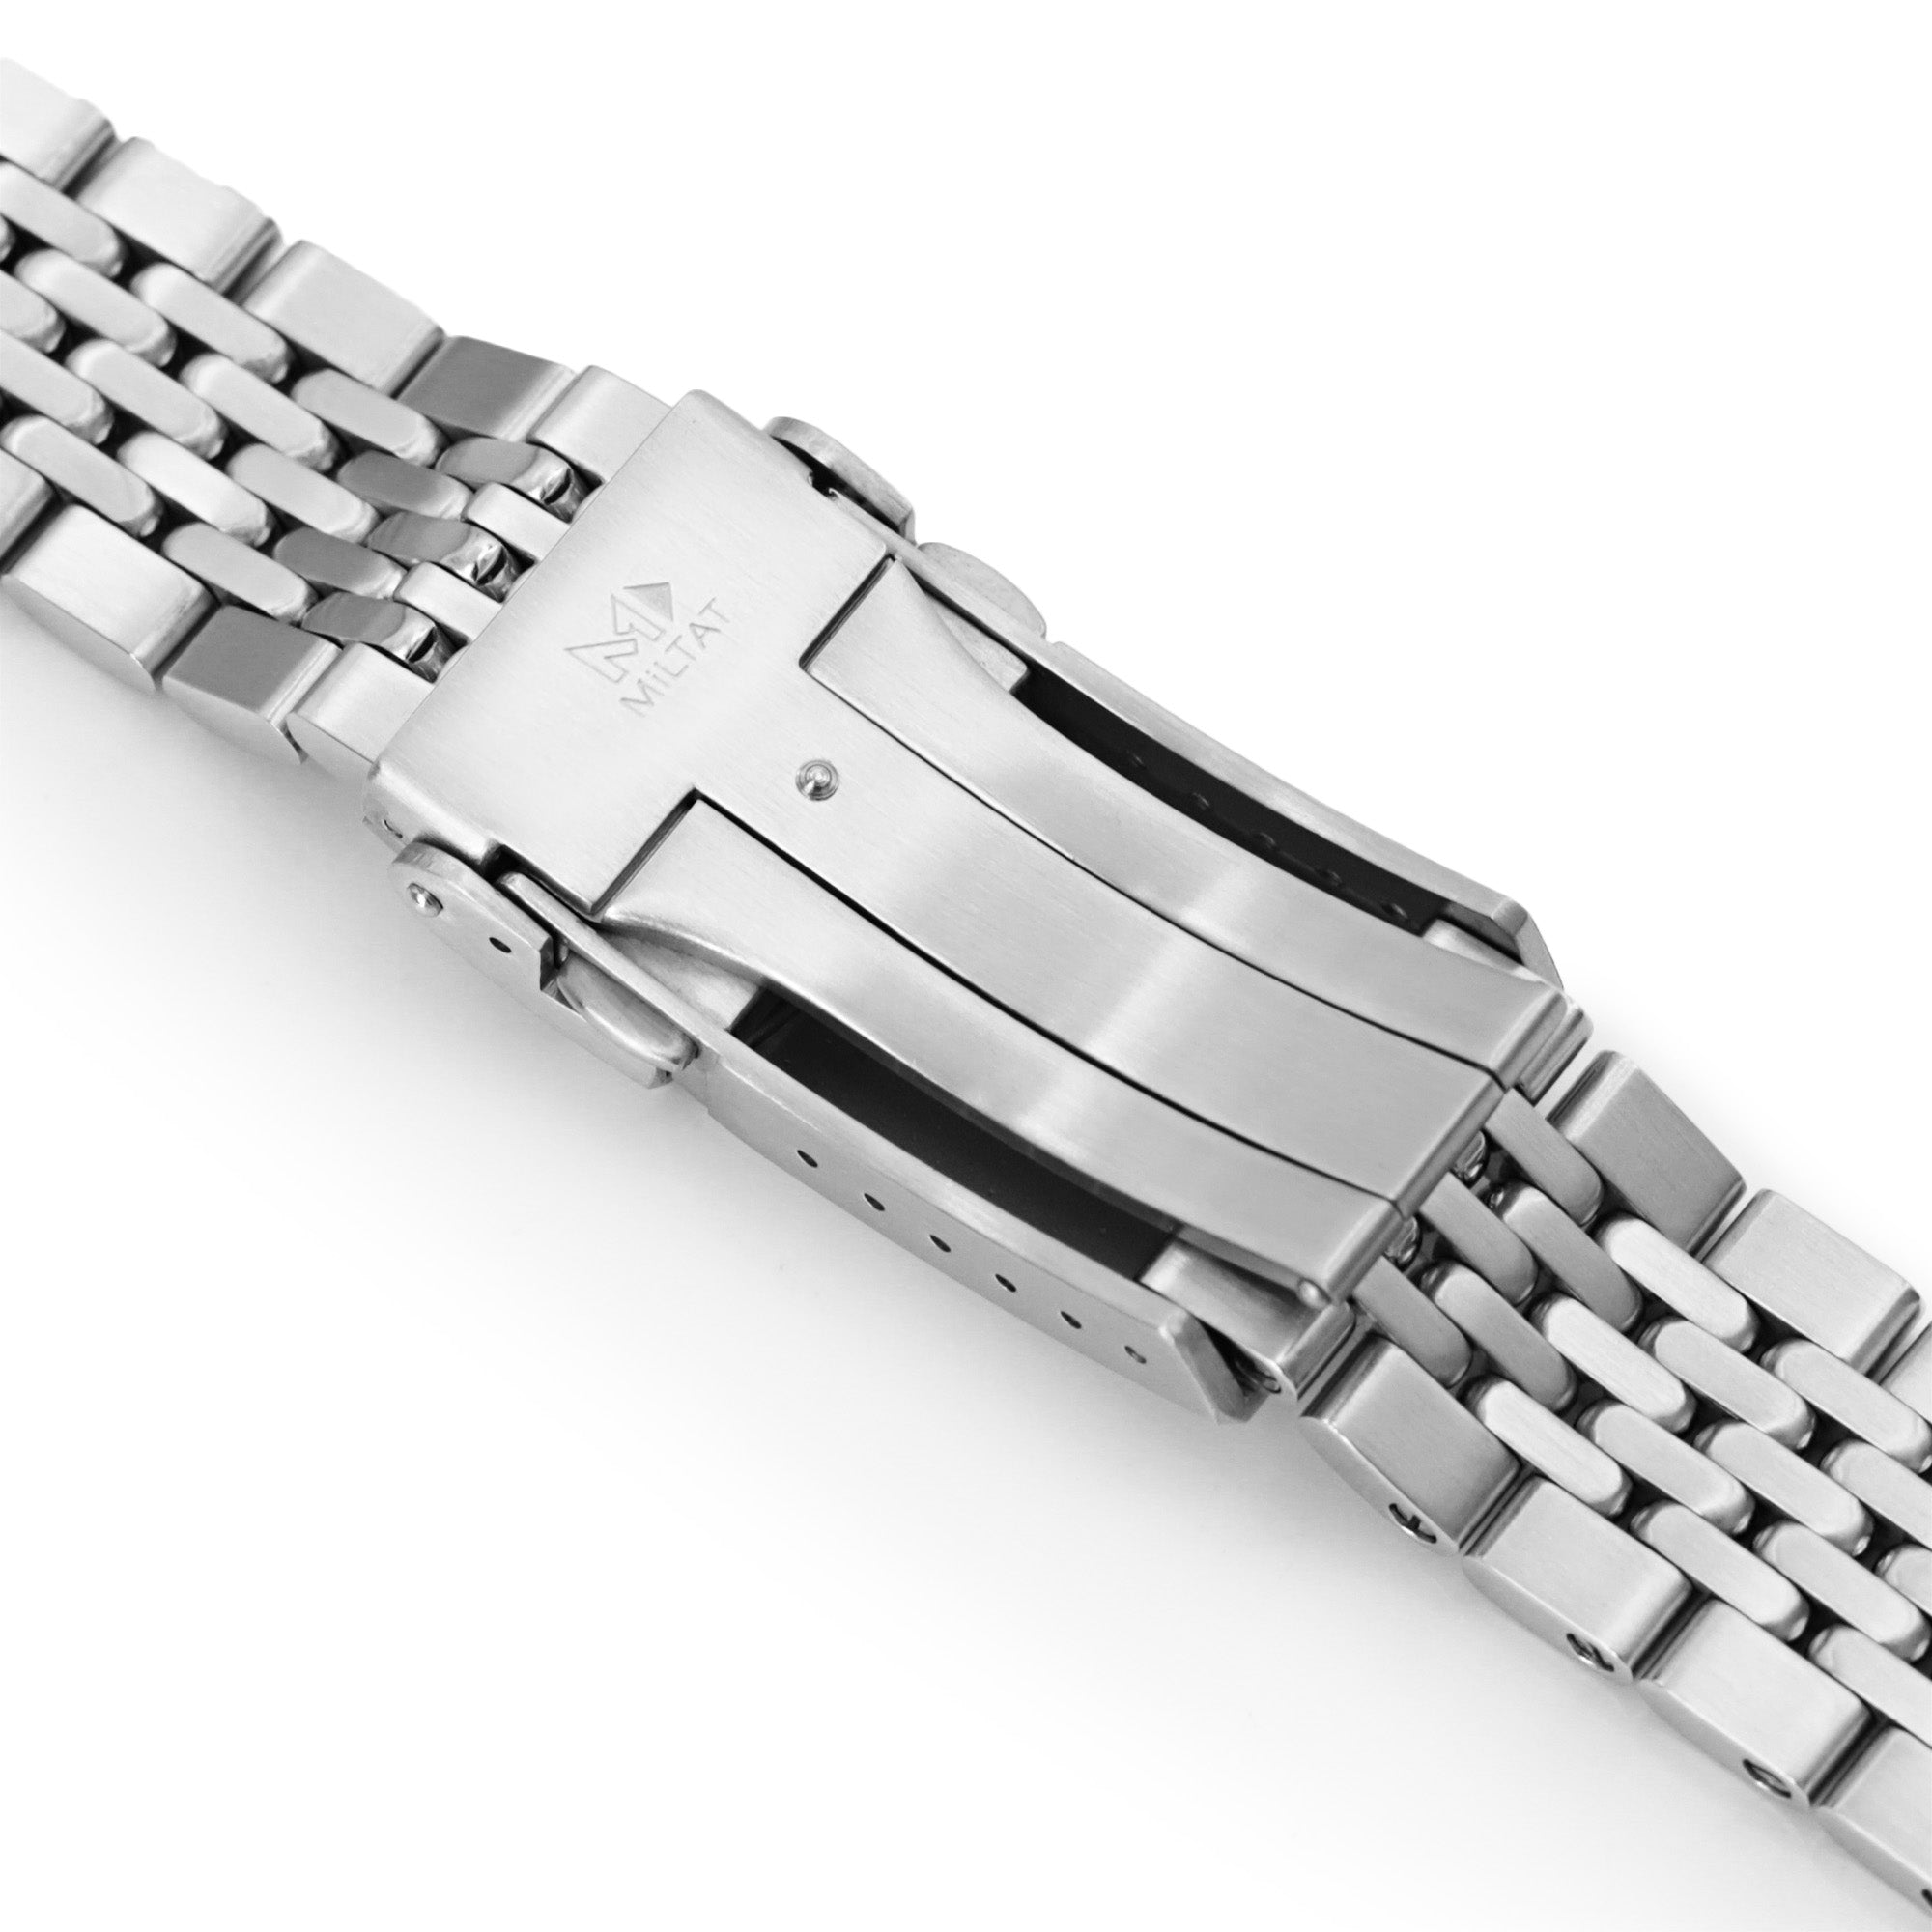 22mm Goma BOR Watch Band compatible with Orient Kamasu, 316L Stainless Steel Brushed and Polished V-Clasp